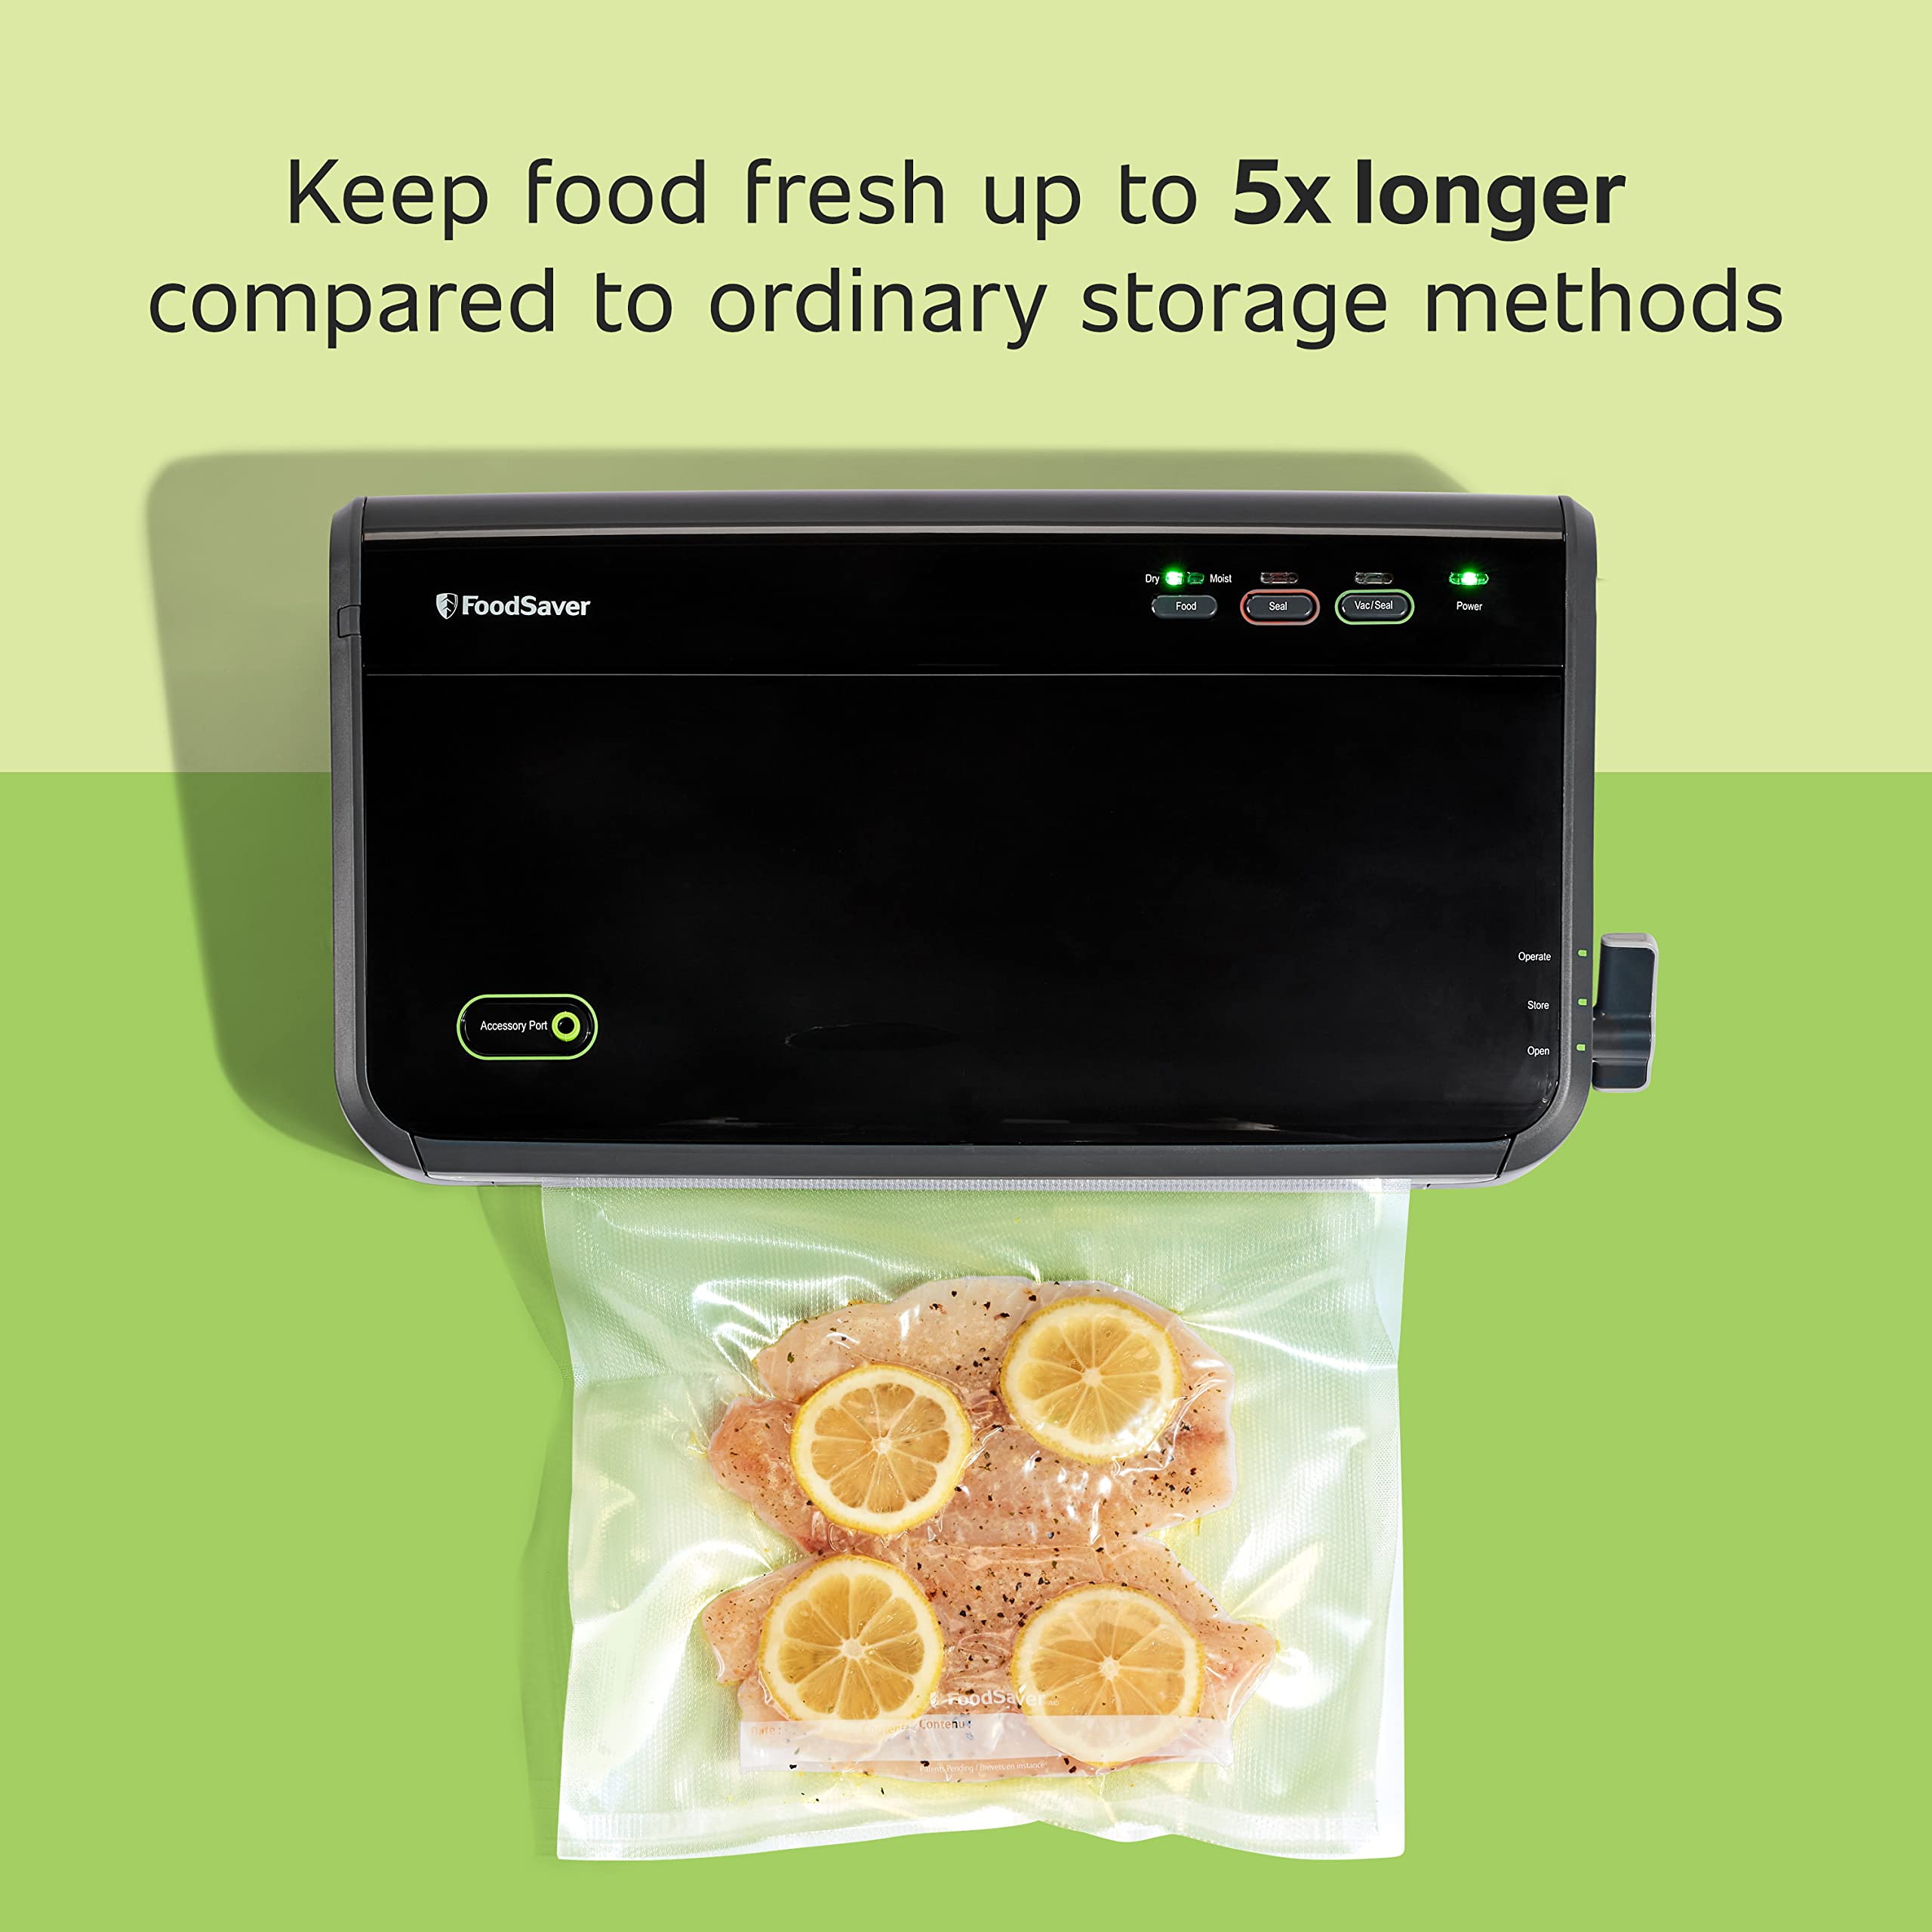 FoodSaver Vacuum Sealer Machine with Automatic Bag Detection, Sealer Bags and Roll, and Handheld Vacuum Sealer for Airtight Food Storage and Sous Vide, Black